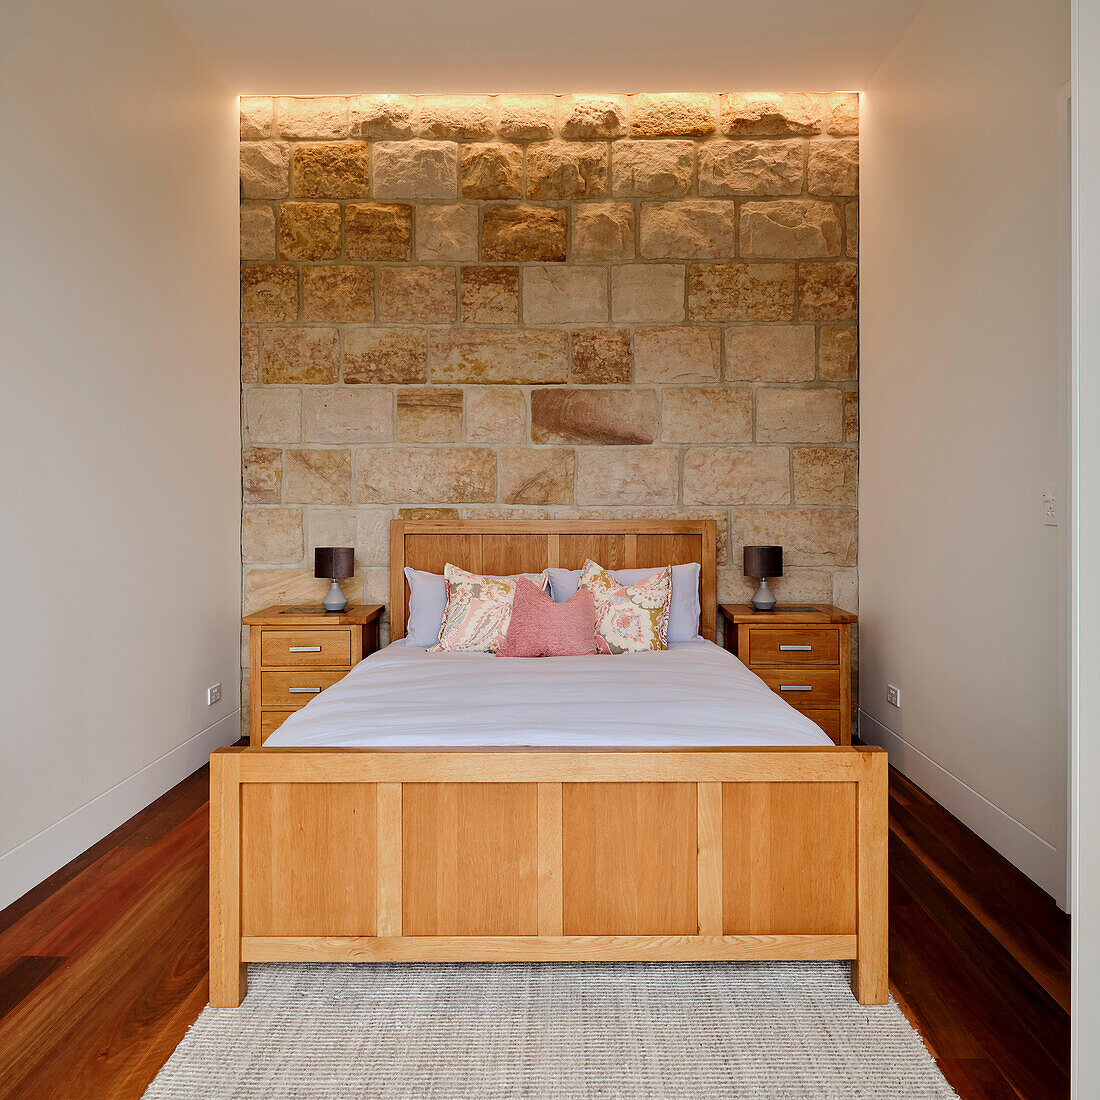 A wooden double bed in a bedroom with a sandstone wall